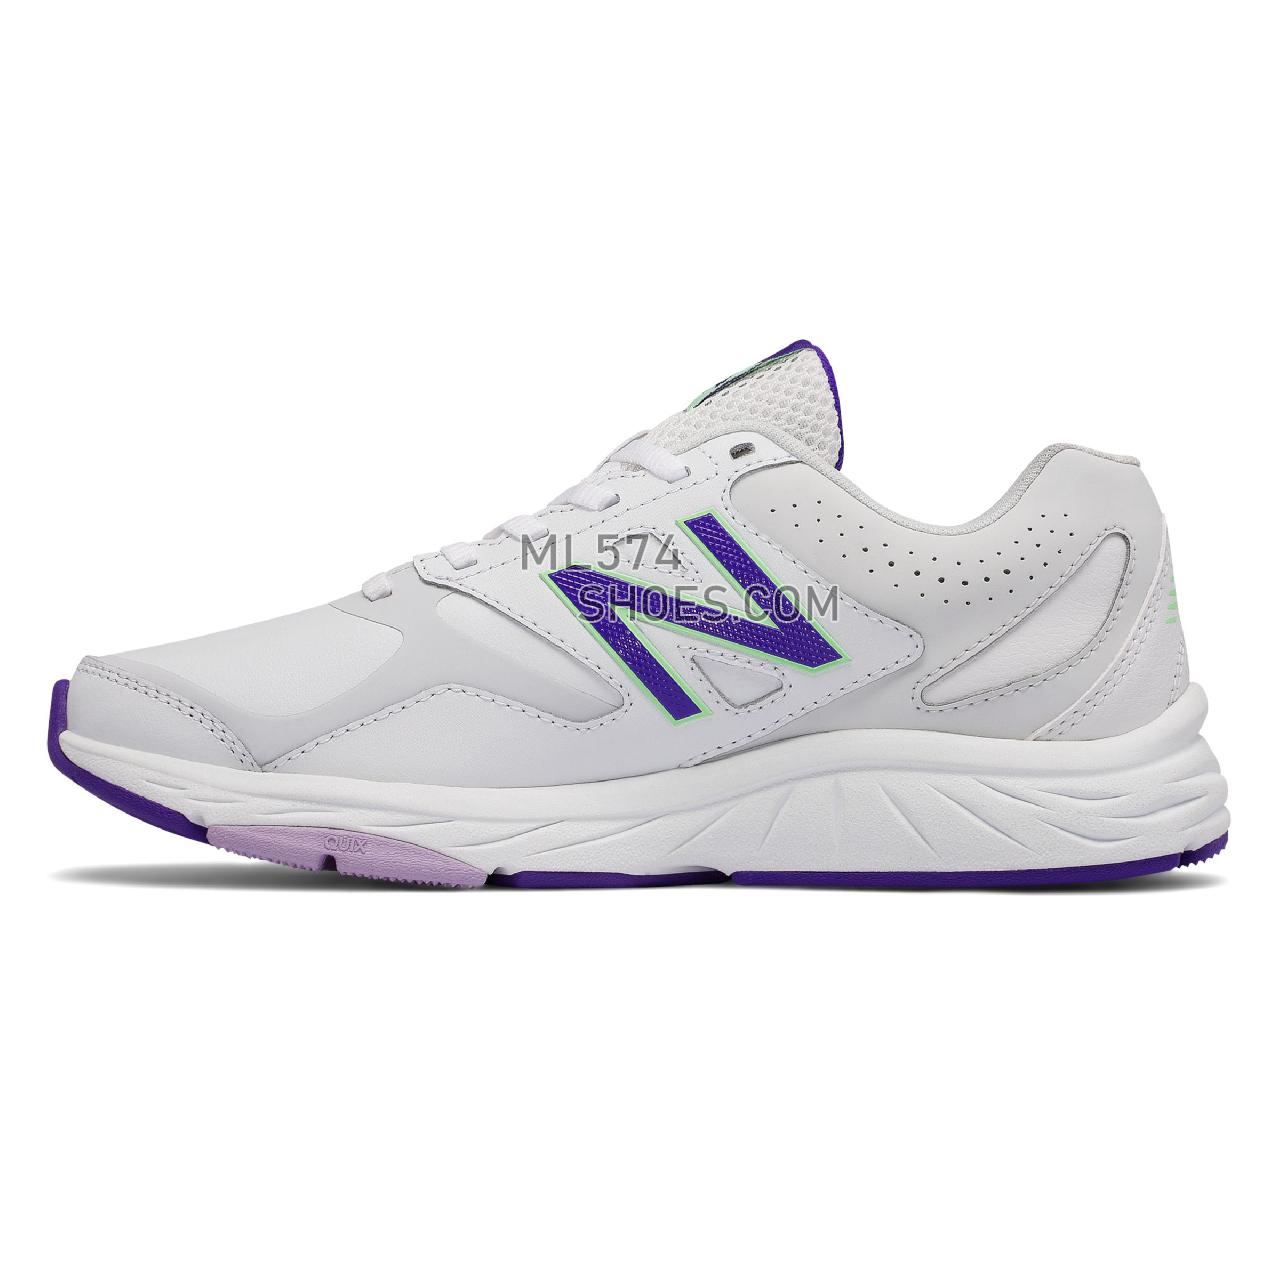 New Balance New Balance 824 Trainer - Women's 824 - X-training White with Deep Violet - WX824WV1